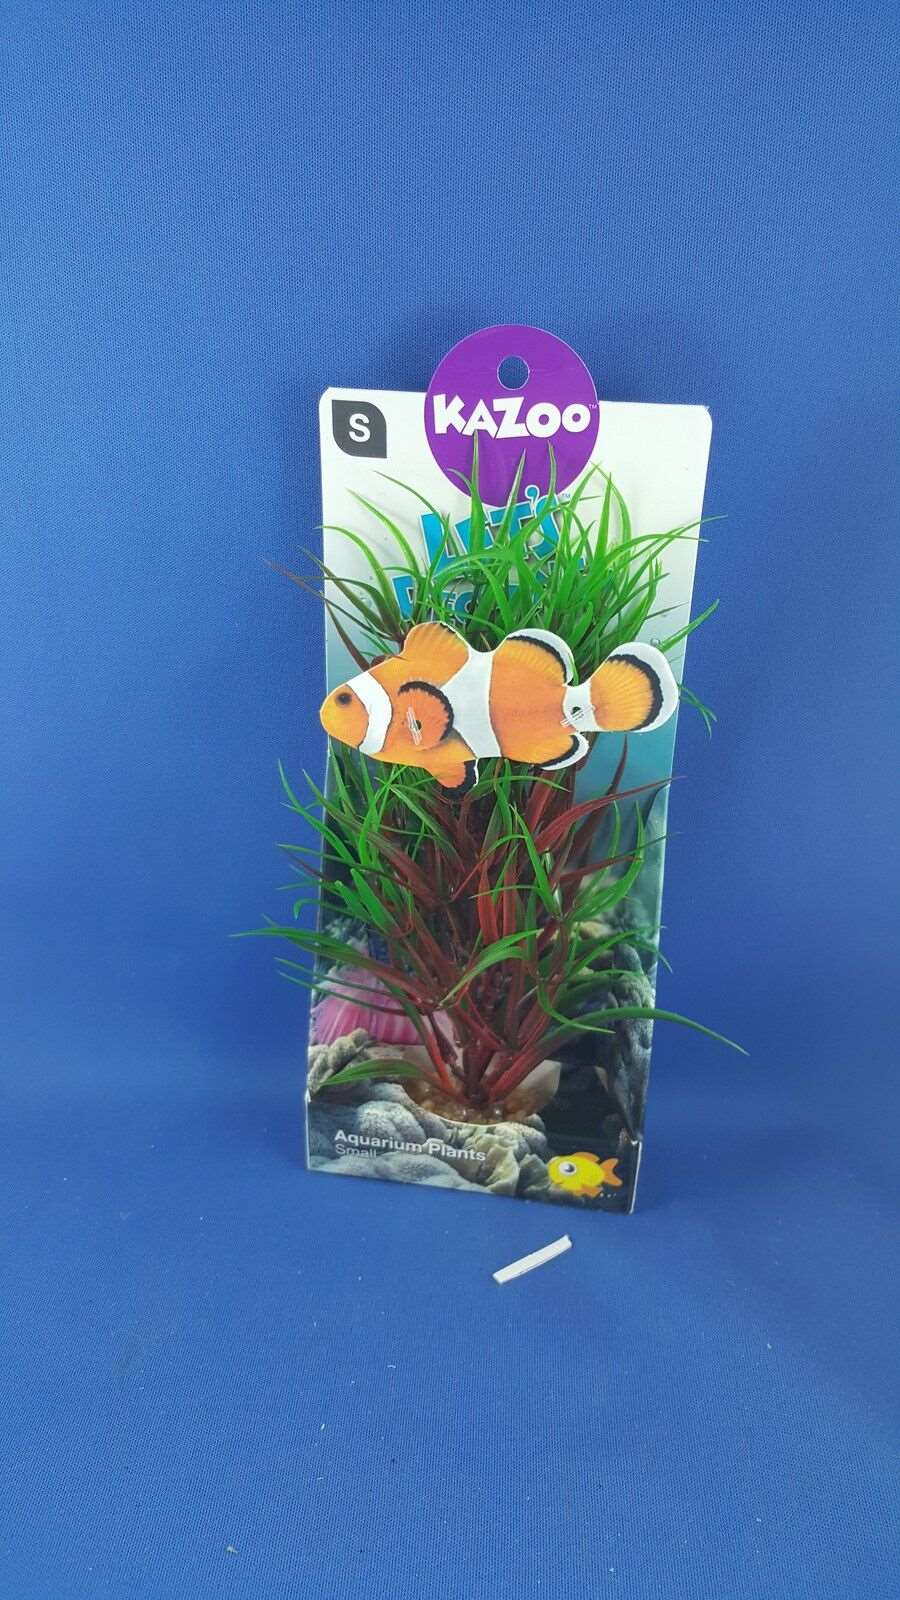 Kazoo aquarium plant, small with green and red leaves with solid pebble base